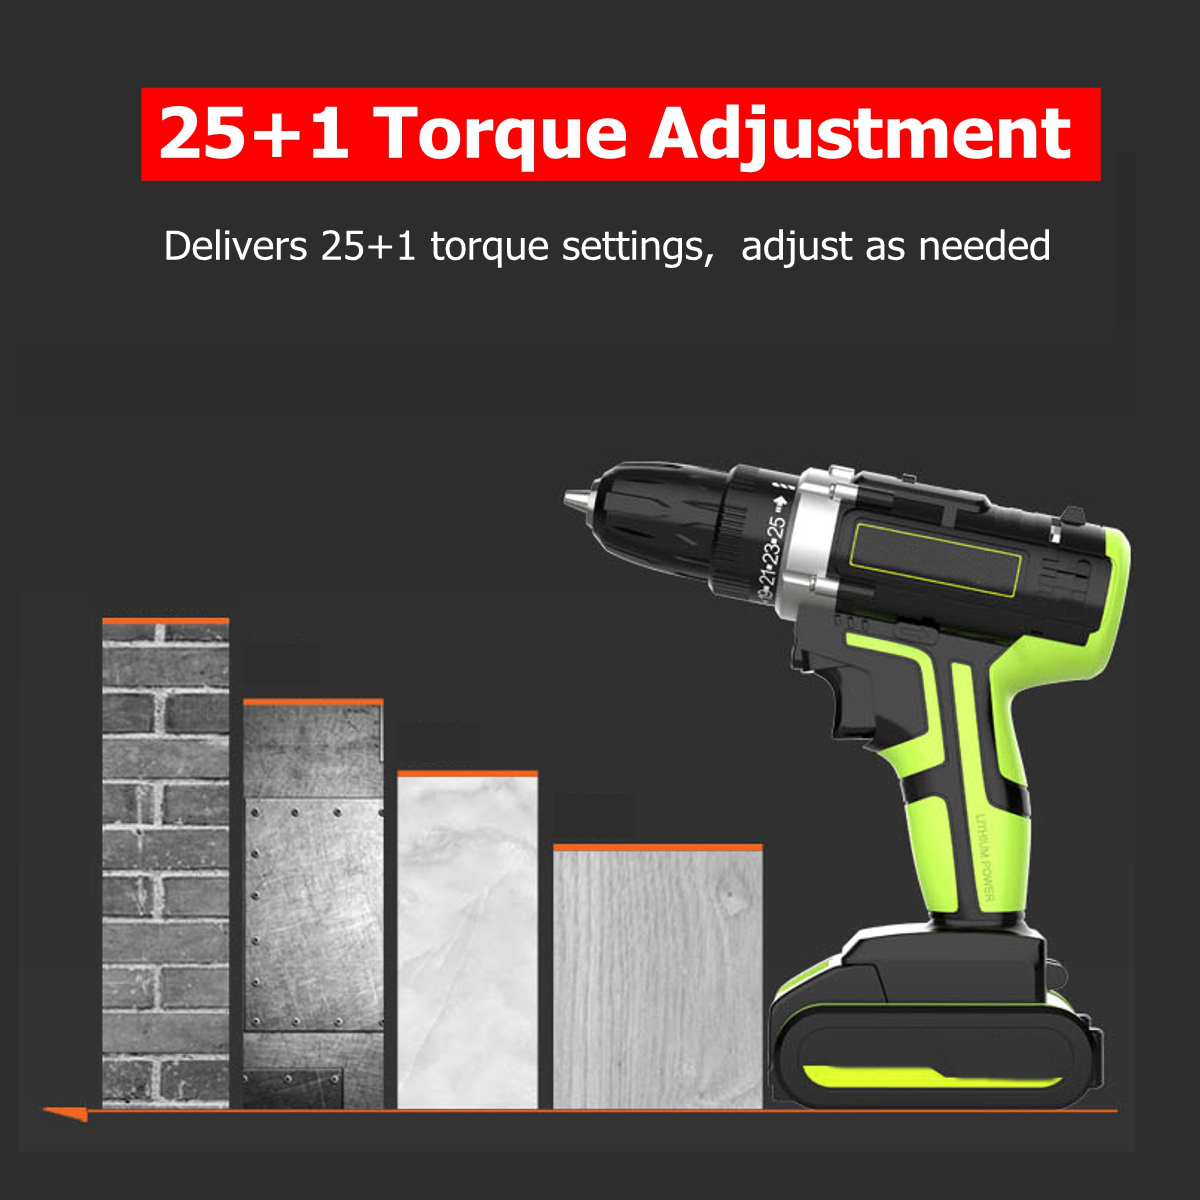 3 In 1 Hammer Drill 48V Cordless Drill Double Speed Power Drills LED lighting 1/2Pcs Large Capacity Battery 50Nm 25+1 Torque Electric Drill 19